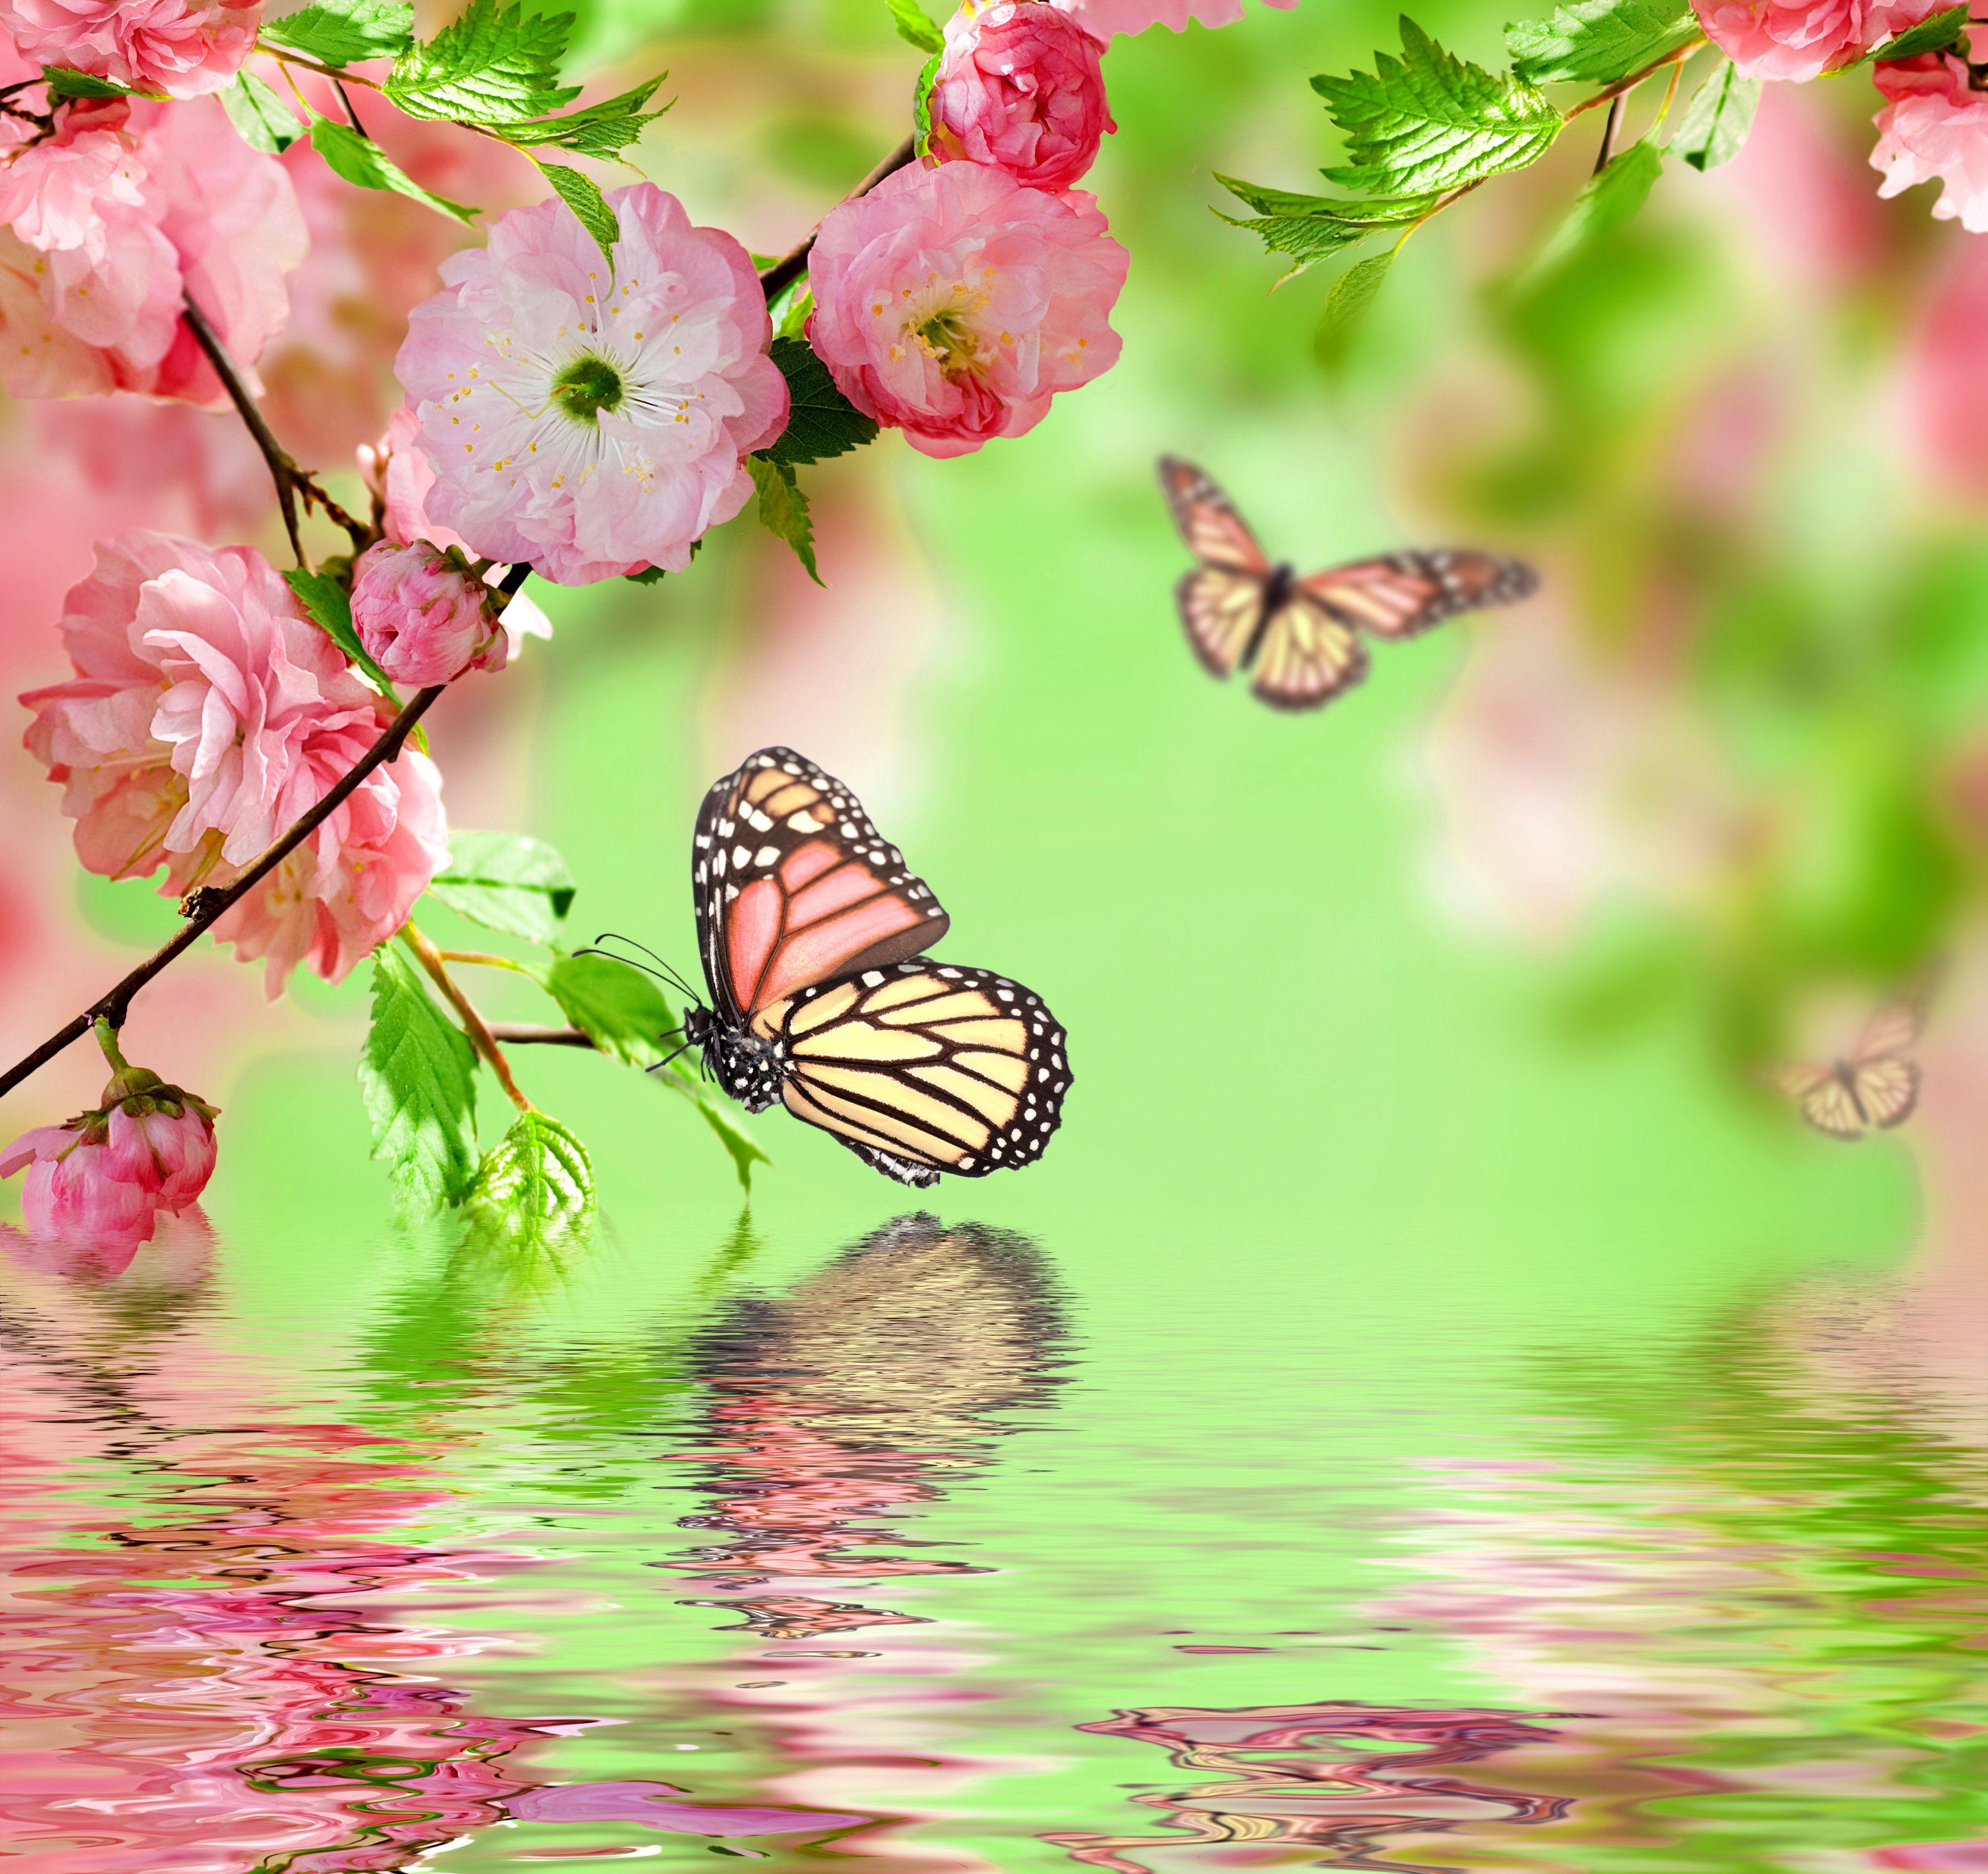 Pastel Pink Aesthetic Wallpaper Butterfly See More Ideas About Pastel Pink Aesthetic Art Collage Wall Aesthetic Pastel Wallpaper